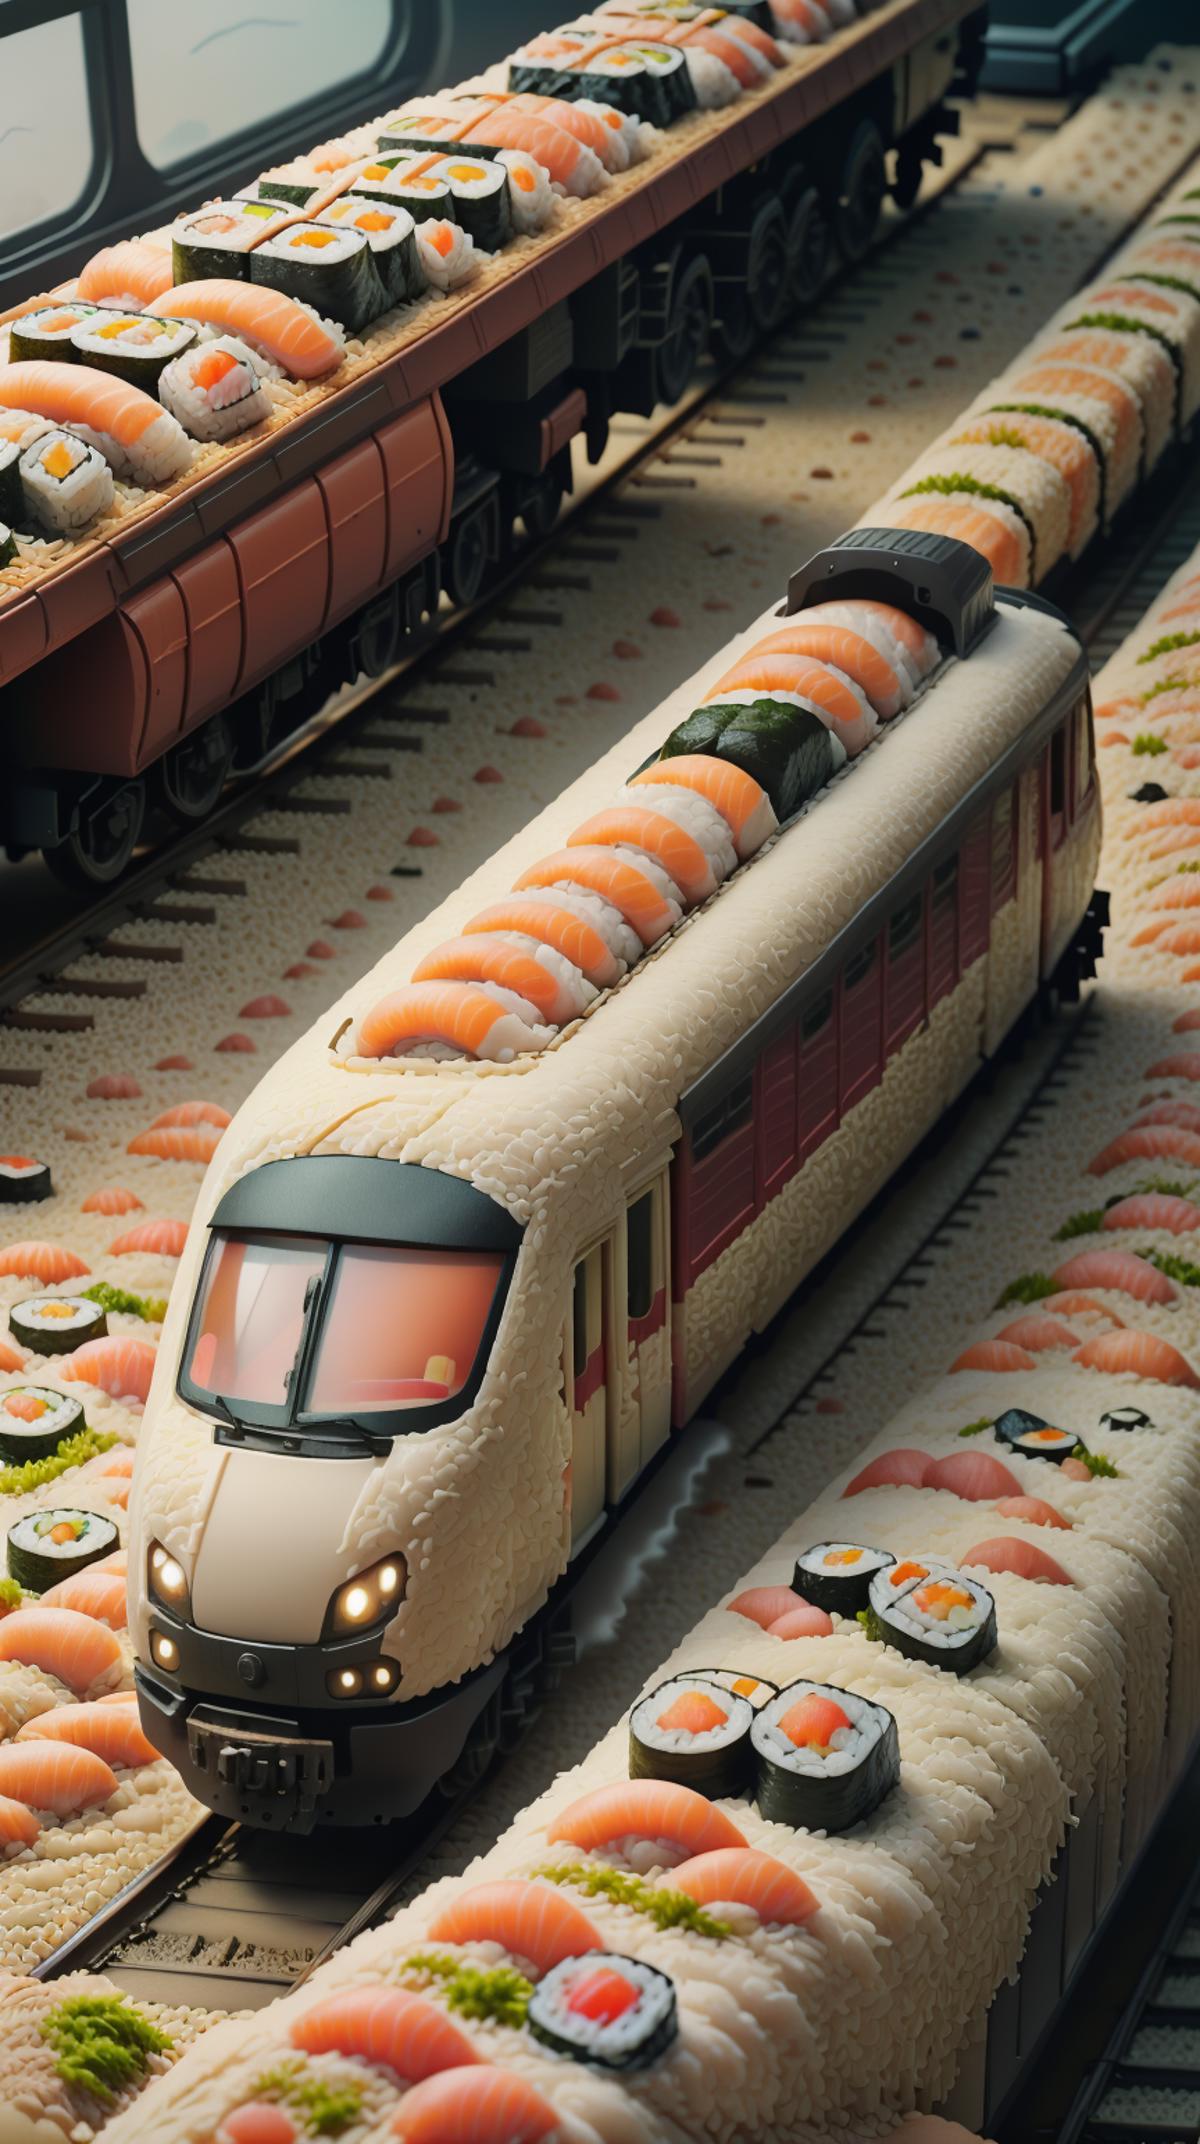 Sushi Style image by mnemic